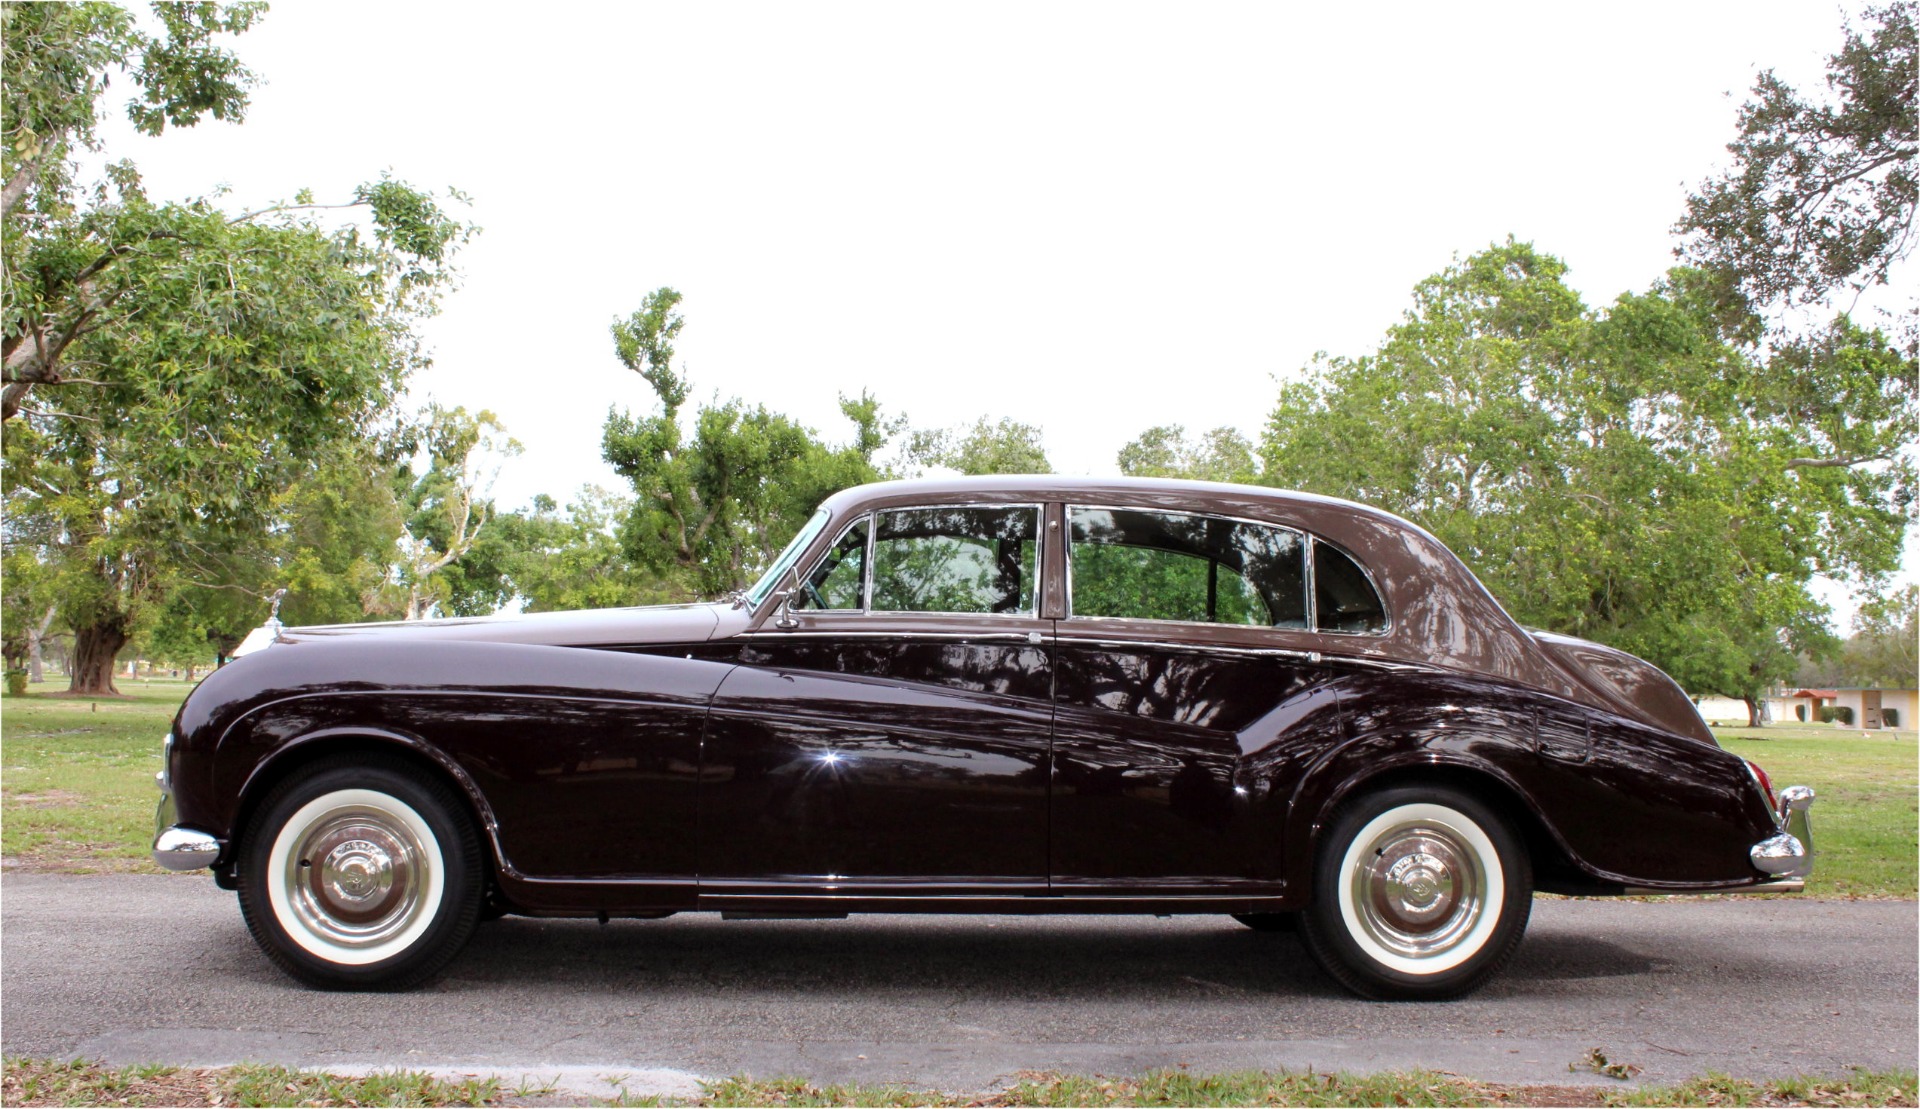 1961 RollsRoyce Silver Cloud II for sale on BaT Auctions  sold for  38000 on November 17 2021 Lot 59812  Bring a Trailer